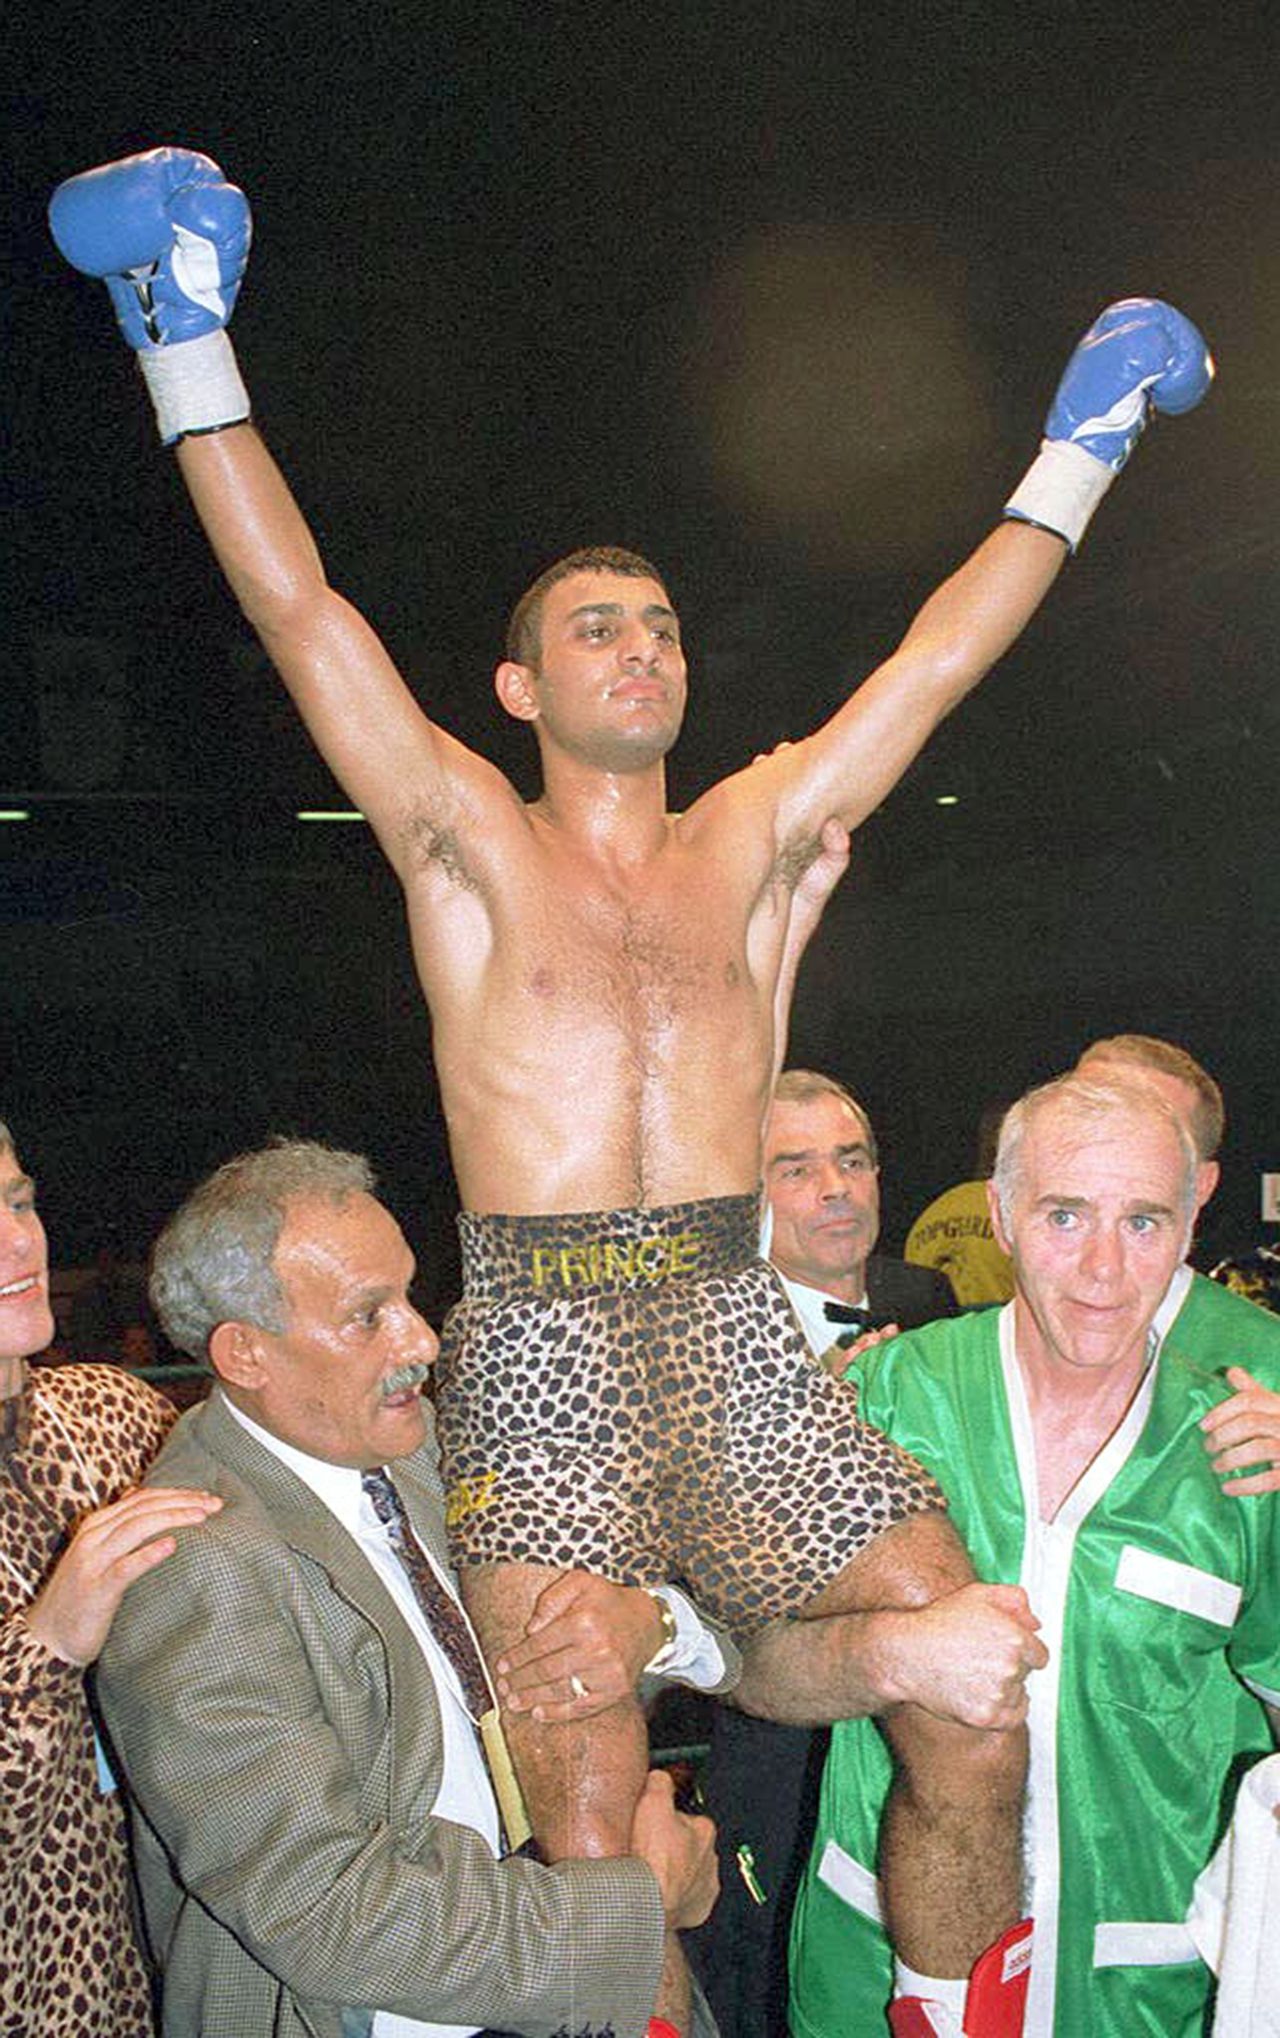 Naseem Hamed (in the middle) and Brendan Ingle (on the right)